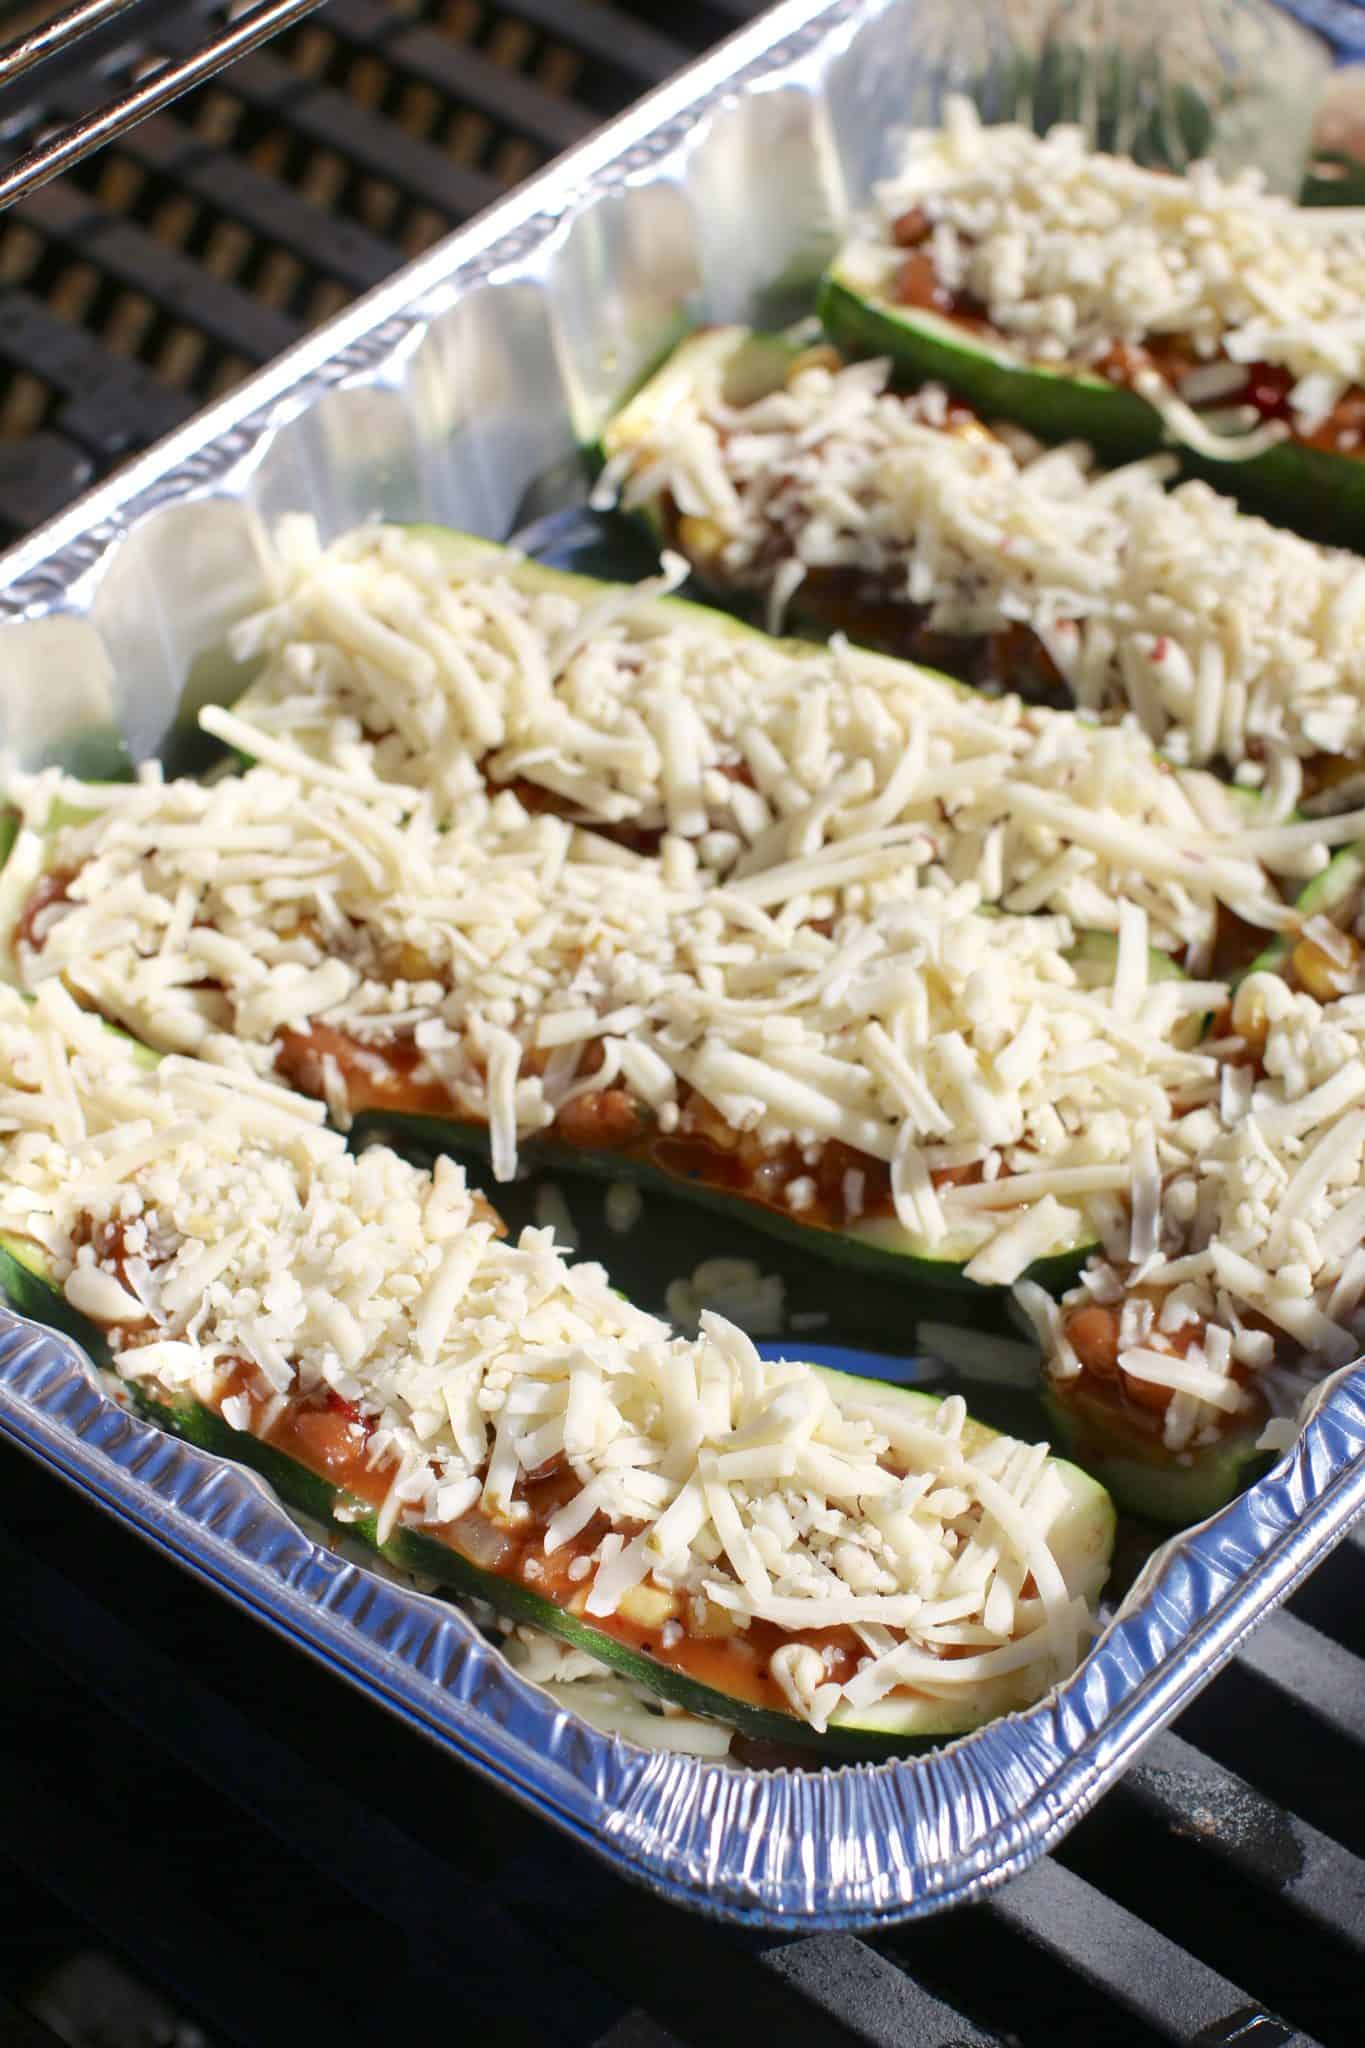 zucchini halves shown in an aluminum baking dish on the grill.